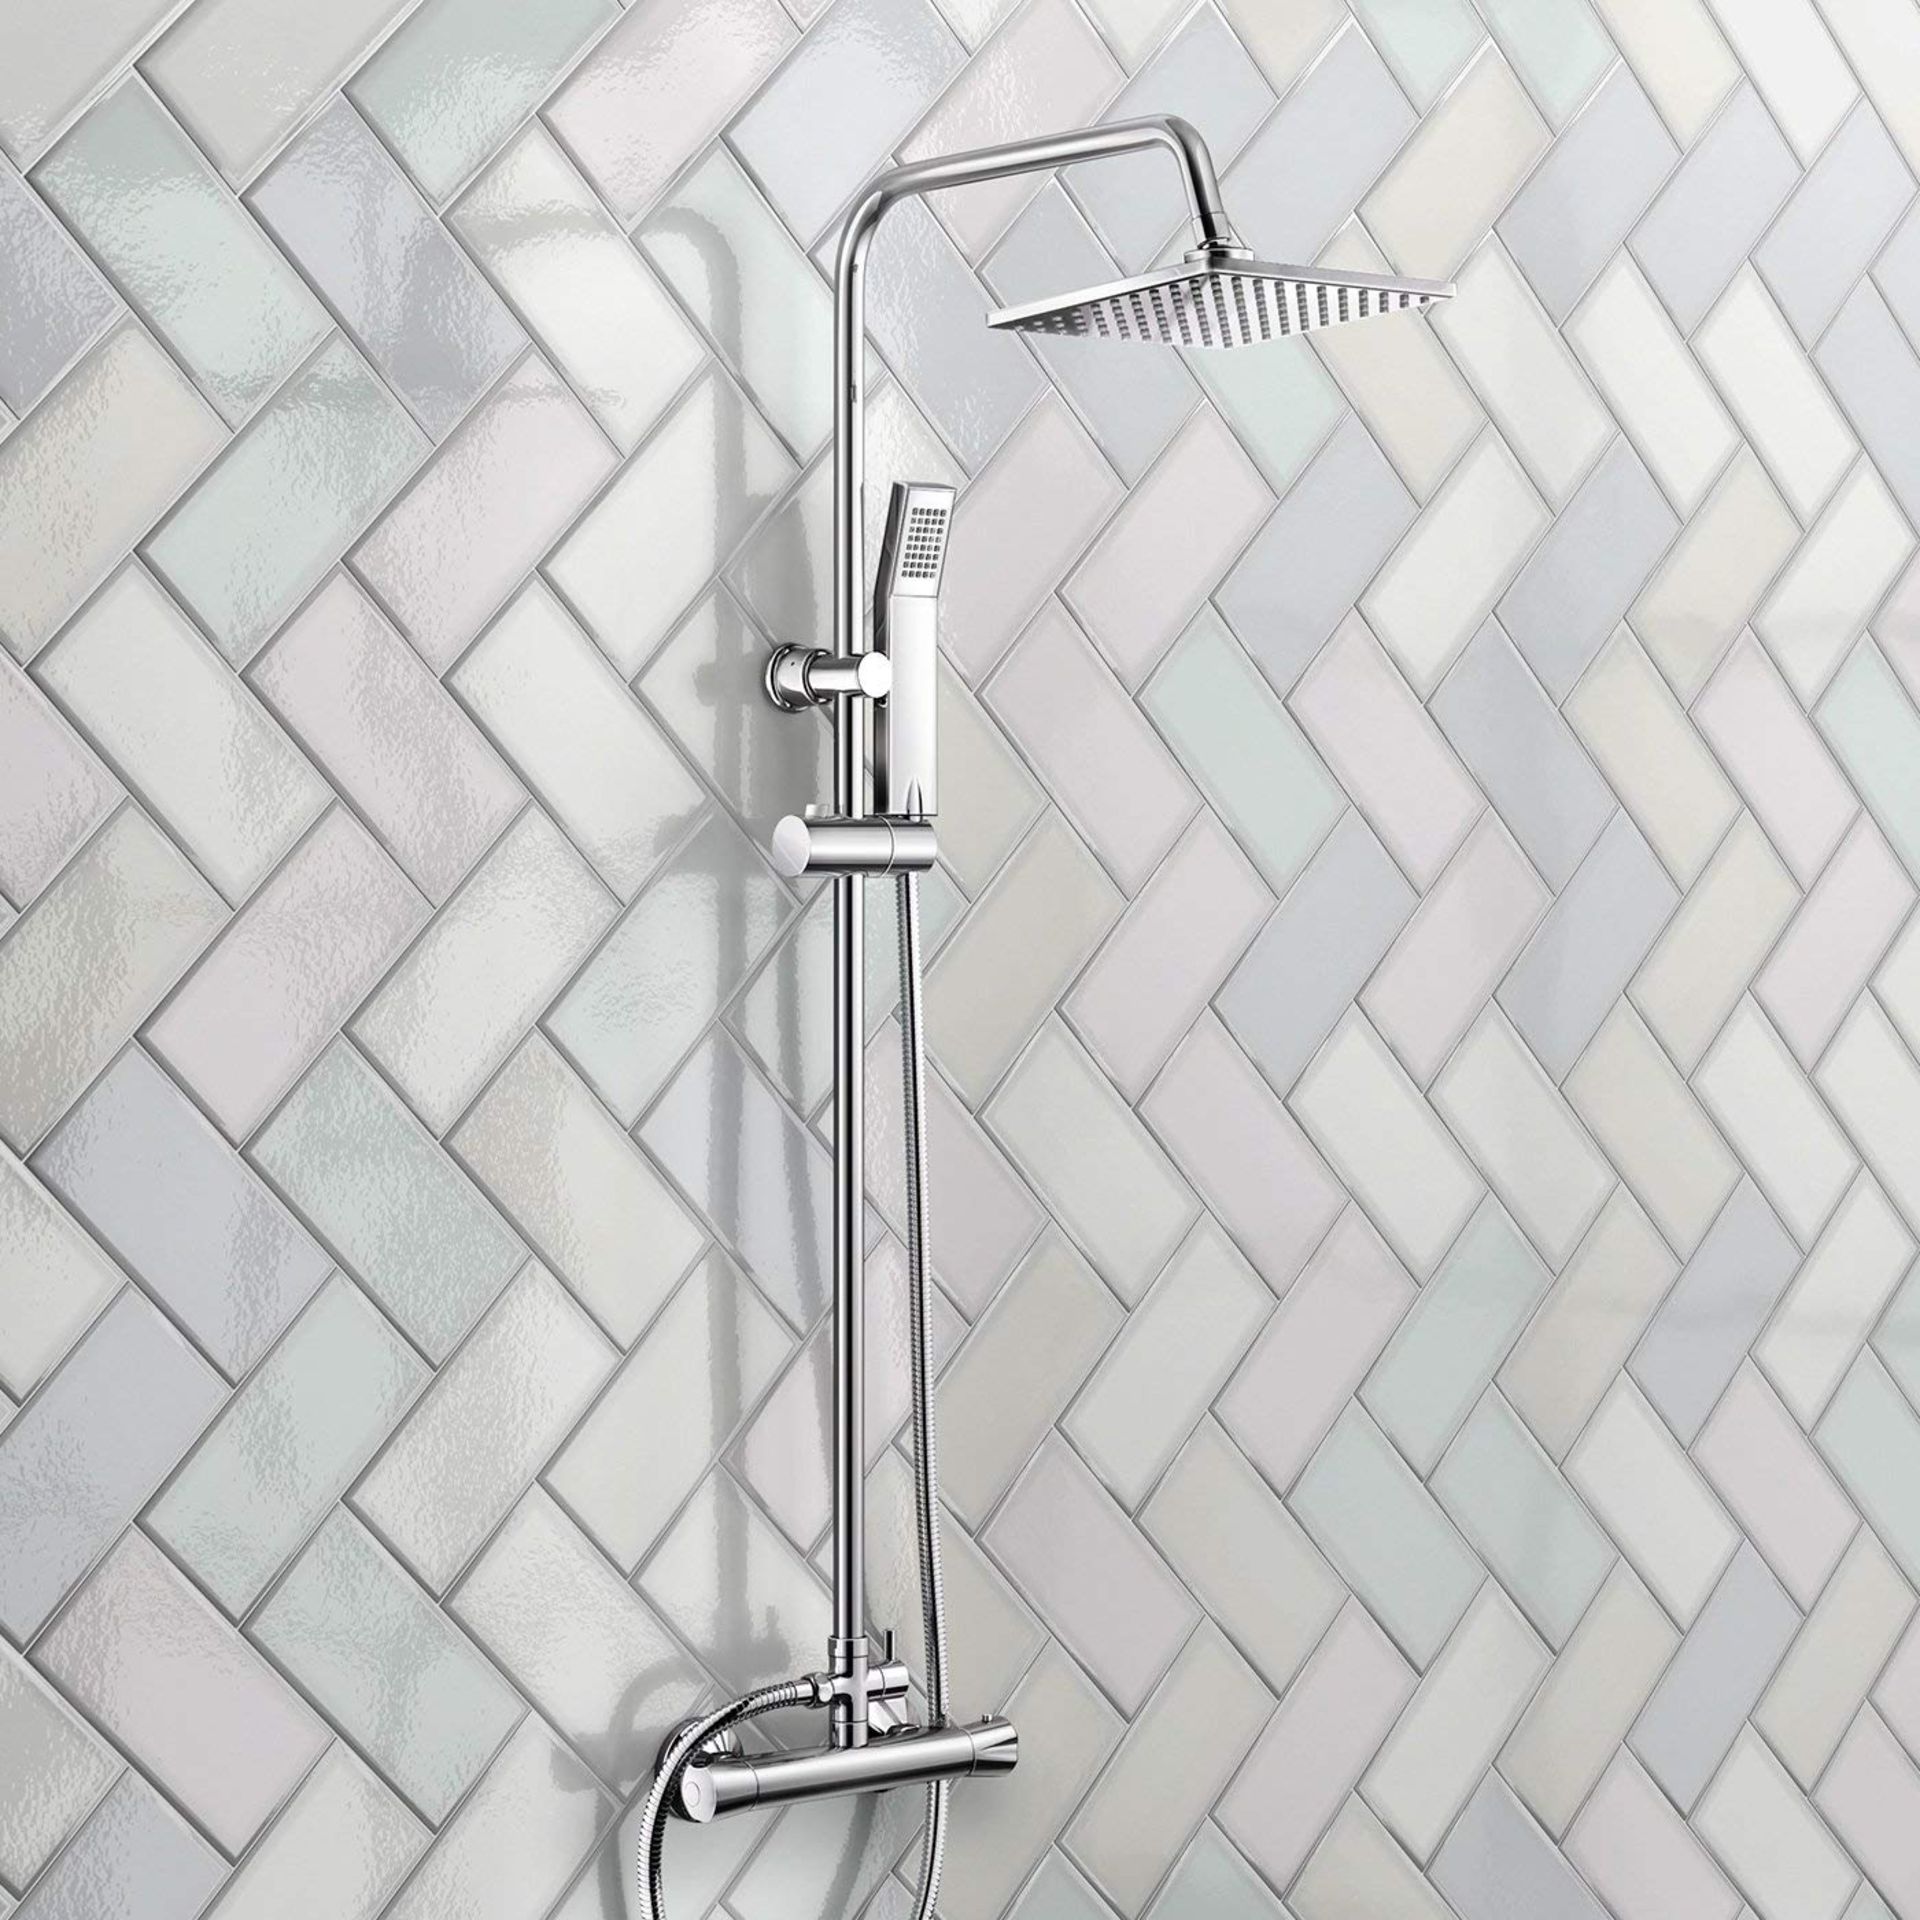 (JL57) Exposed Thermostatic 2-Way Bar Mixer Shower Set Chrome Valve 200mm Square Head +   (JL57) - Image 2 of 2